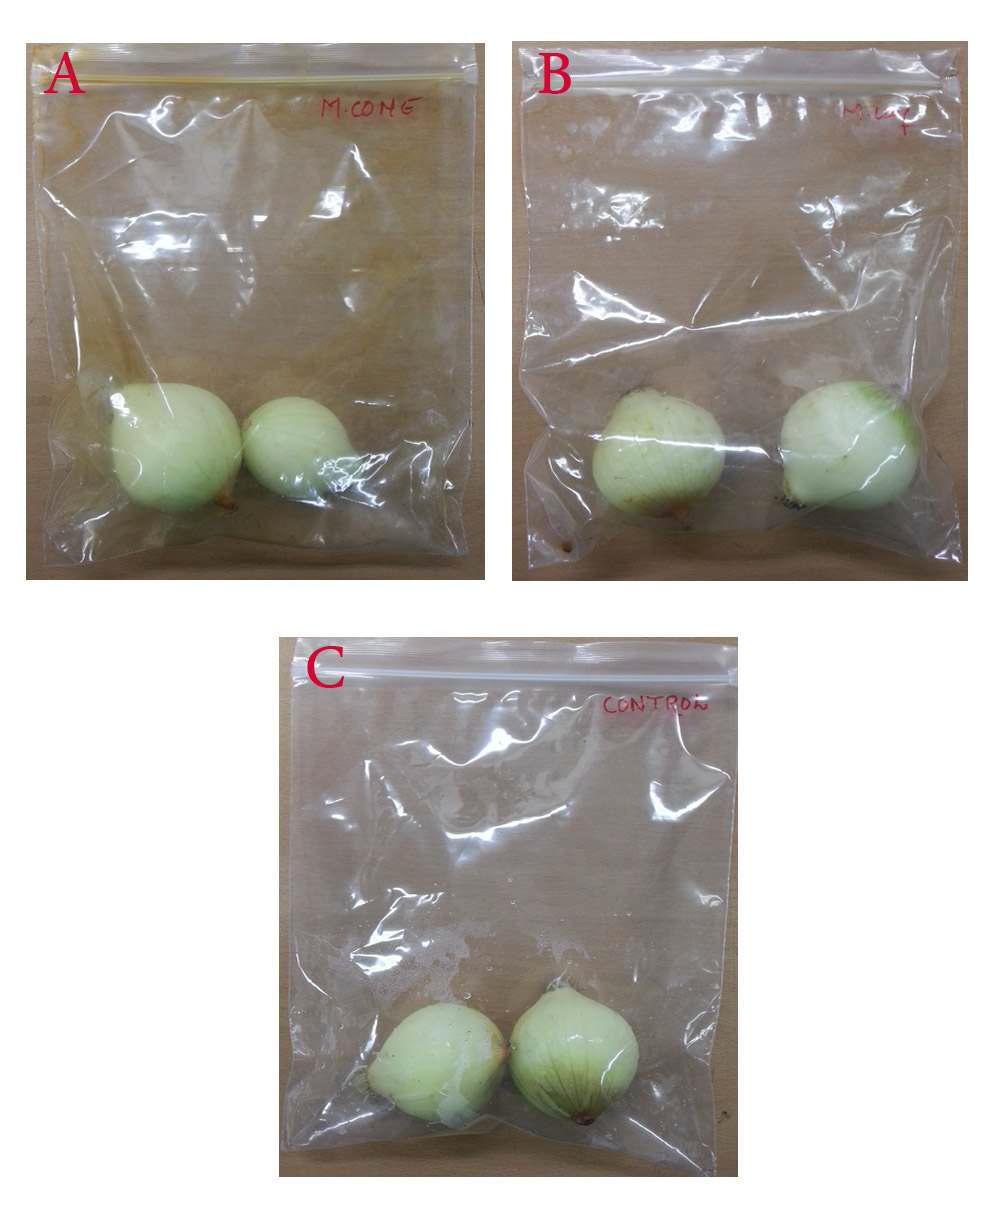 Onion samples packed in different PE film bags at 0 day storage at 25 ± 1℃. (A) Metasequoia cone extract coated film, (B) Metasequoia leaf extract coated film, (C) Control.